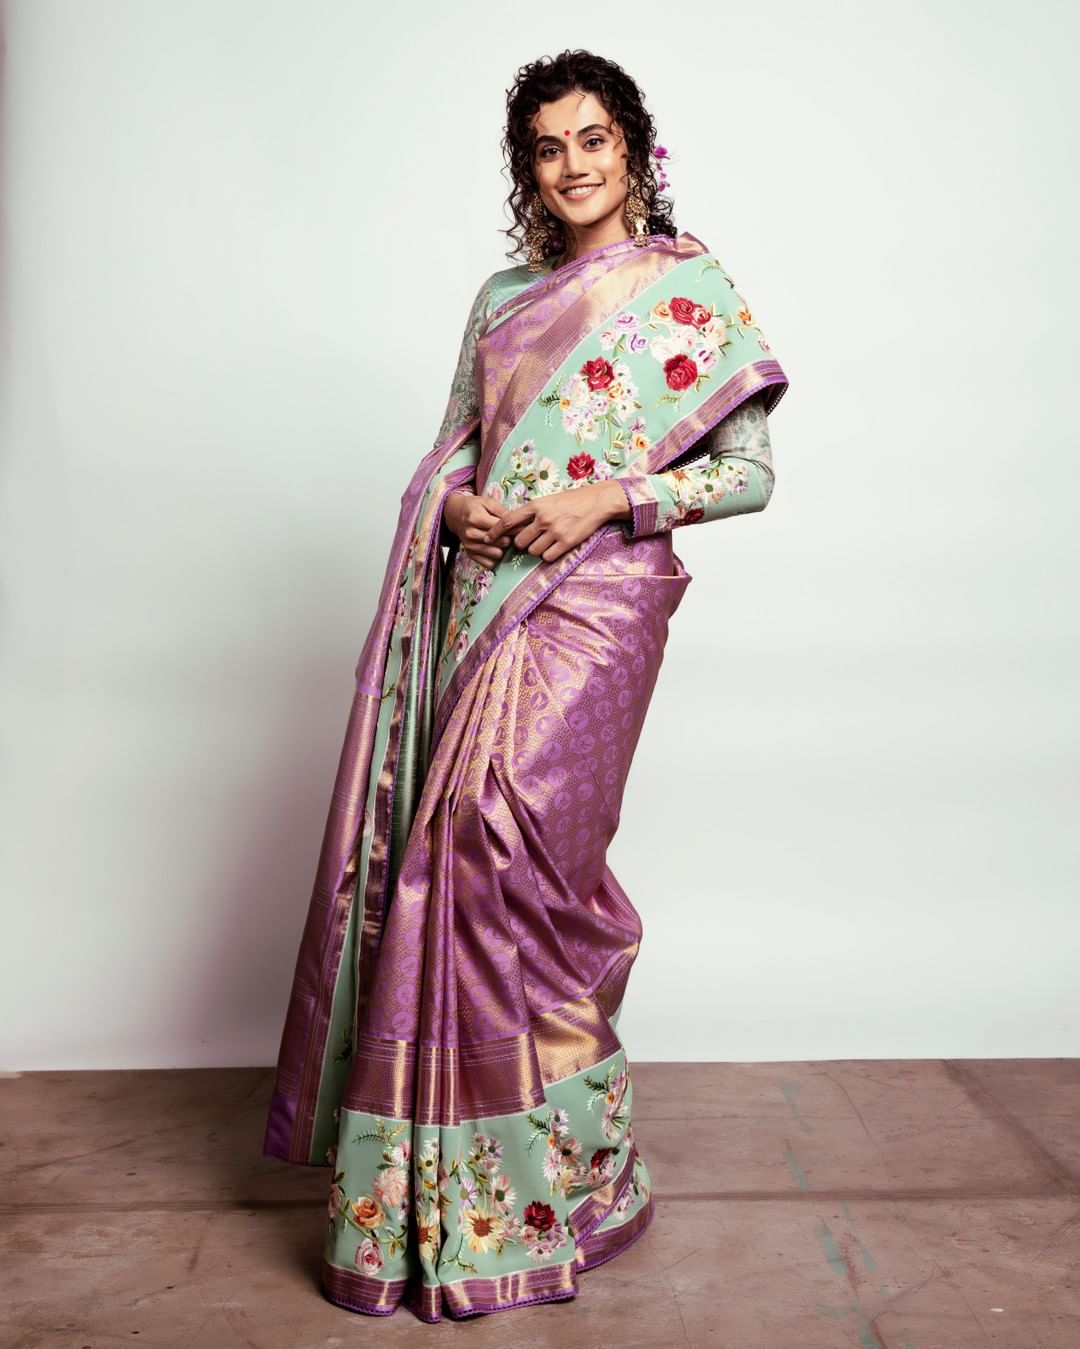 Taapsee Pannu, Gaurang’s show-stopper, wore a Jamdhani sari with large floral designs on the border